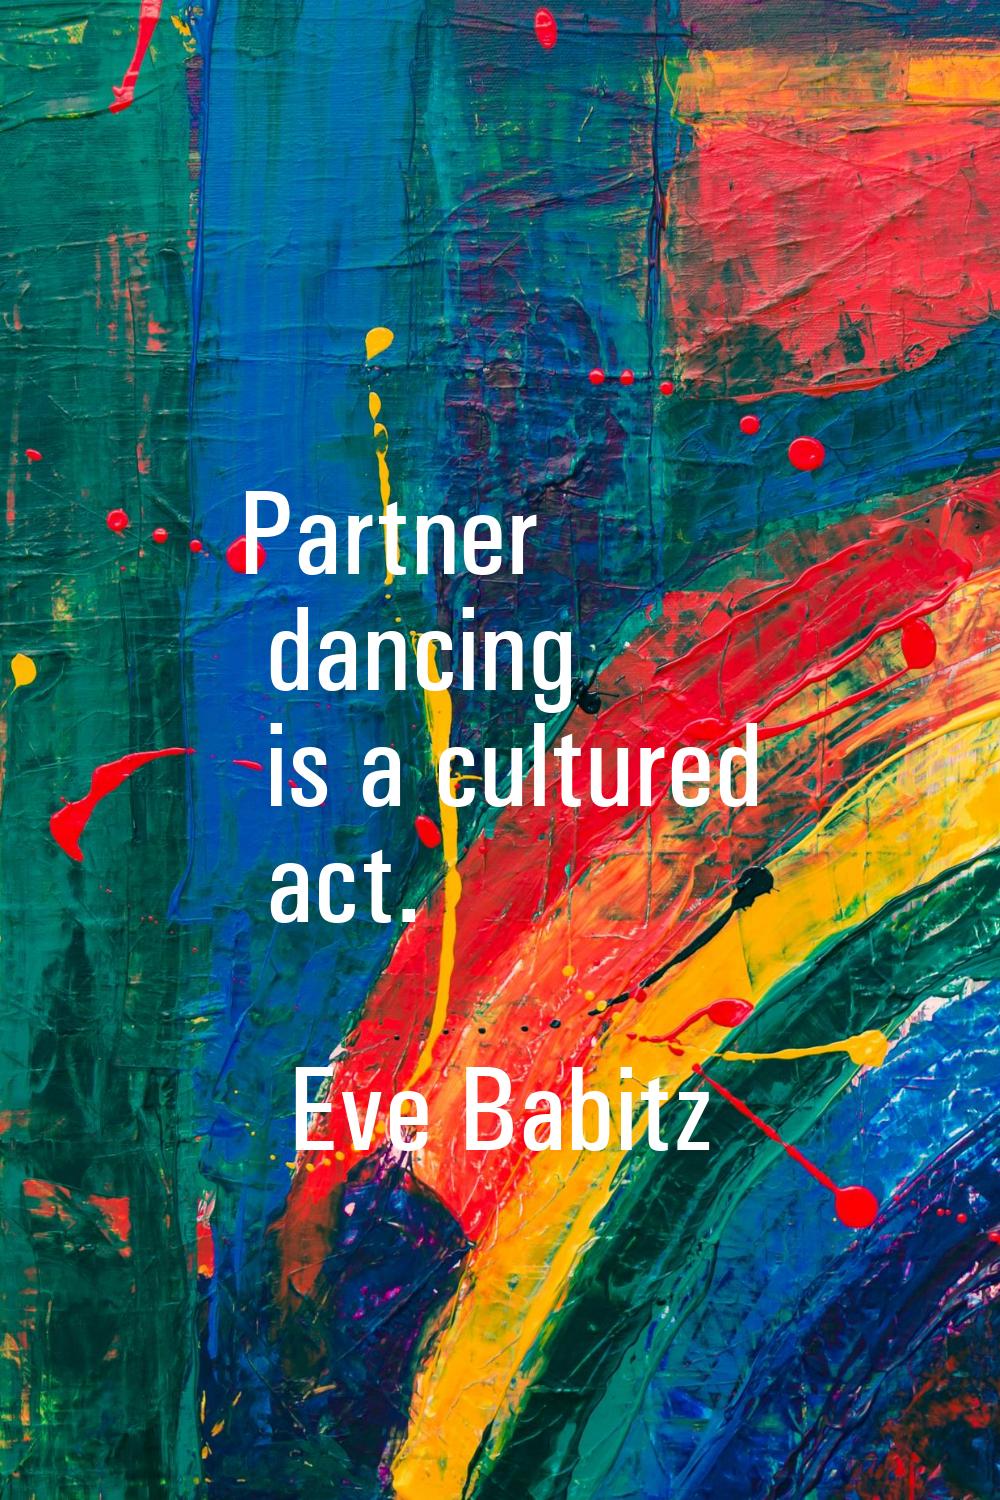 Partner dancing is a cultured act.